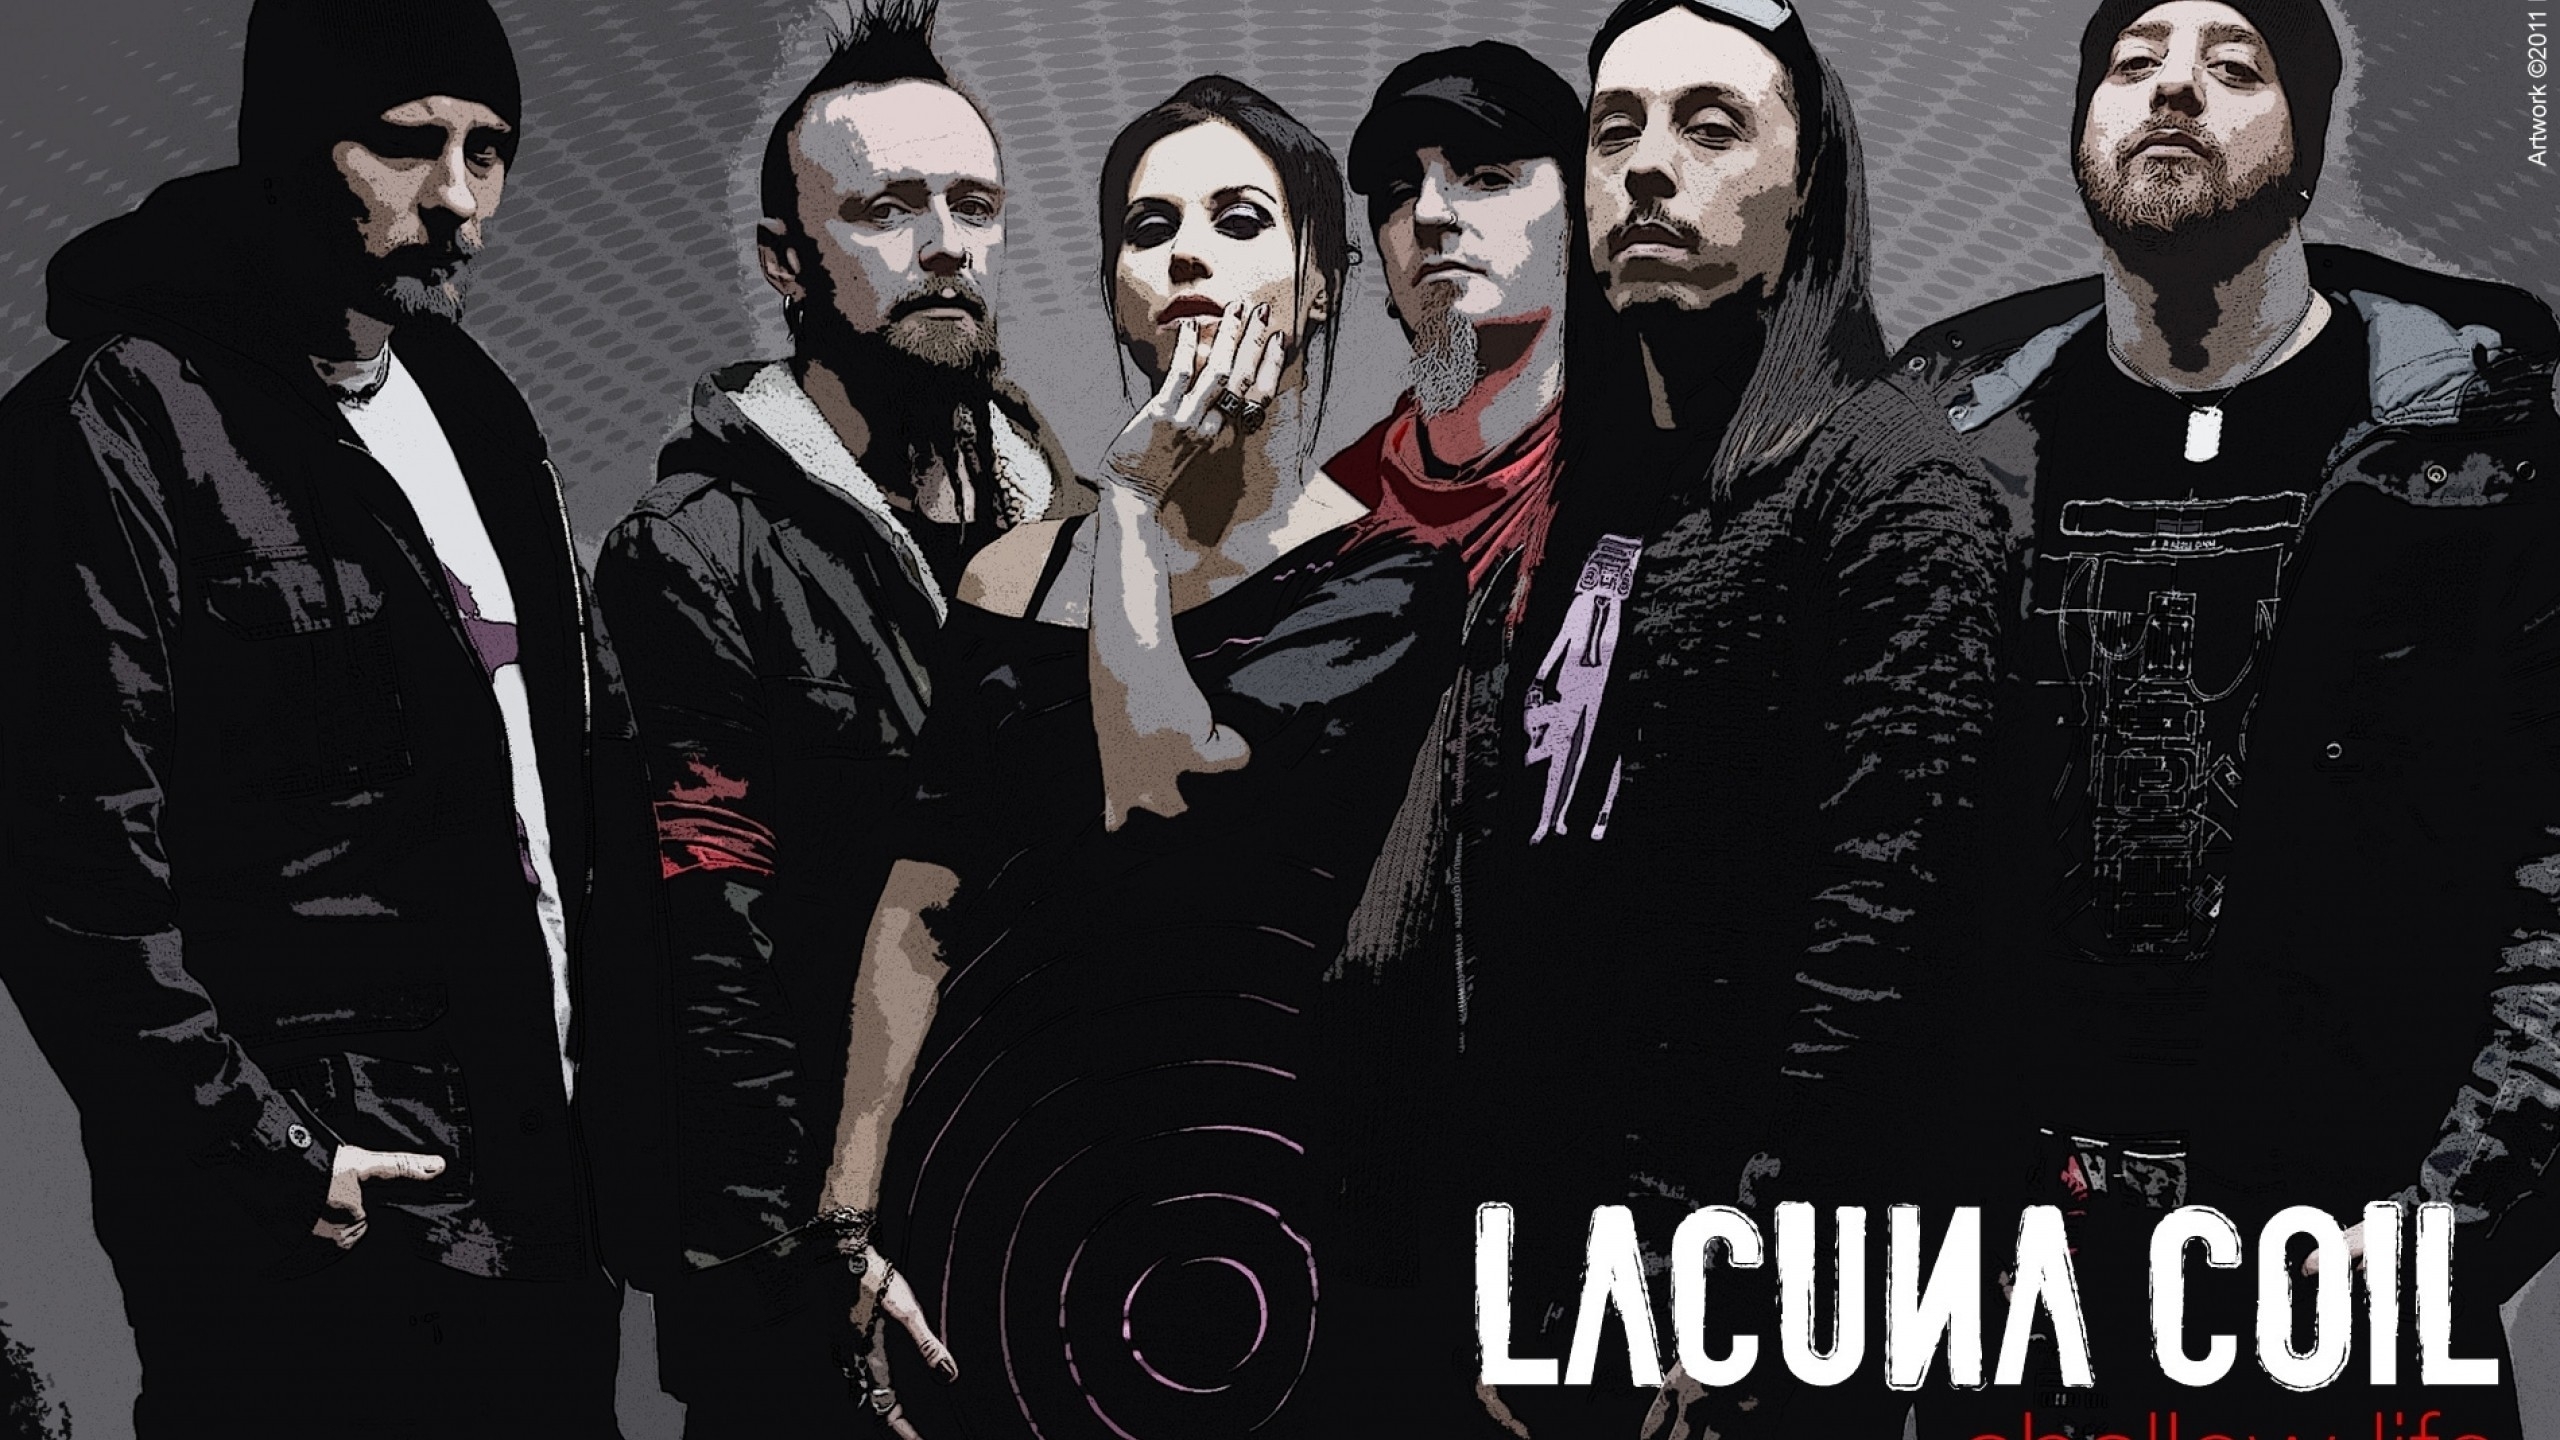 Lacuna Coil Poster for 2560x1440 HDTV resolution